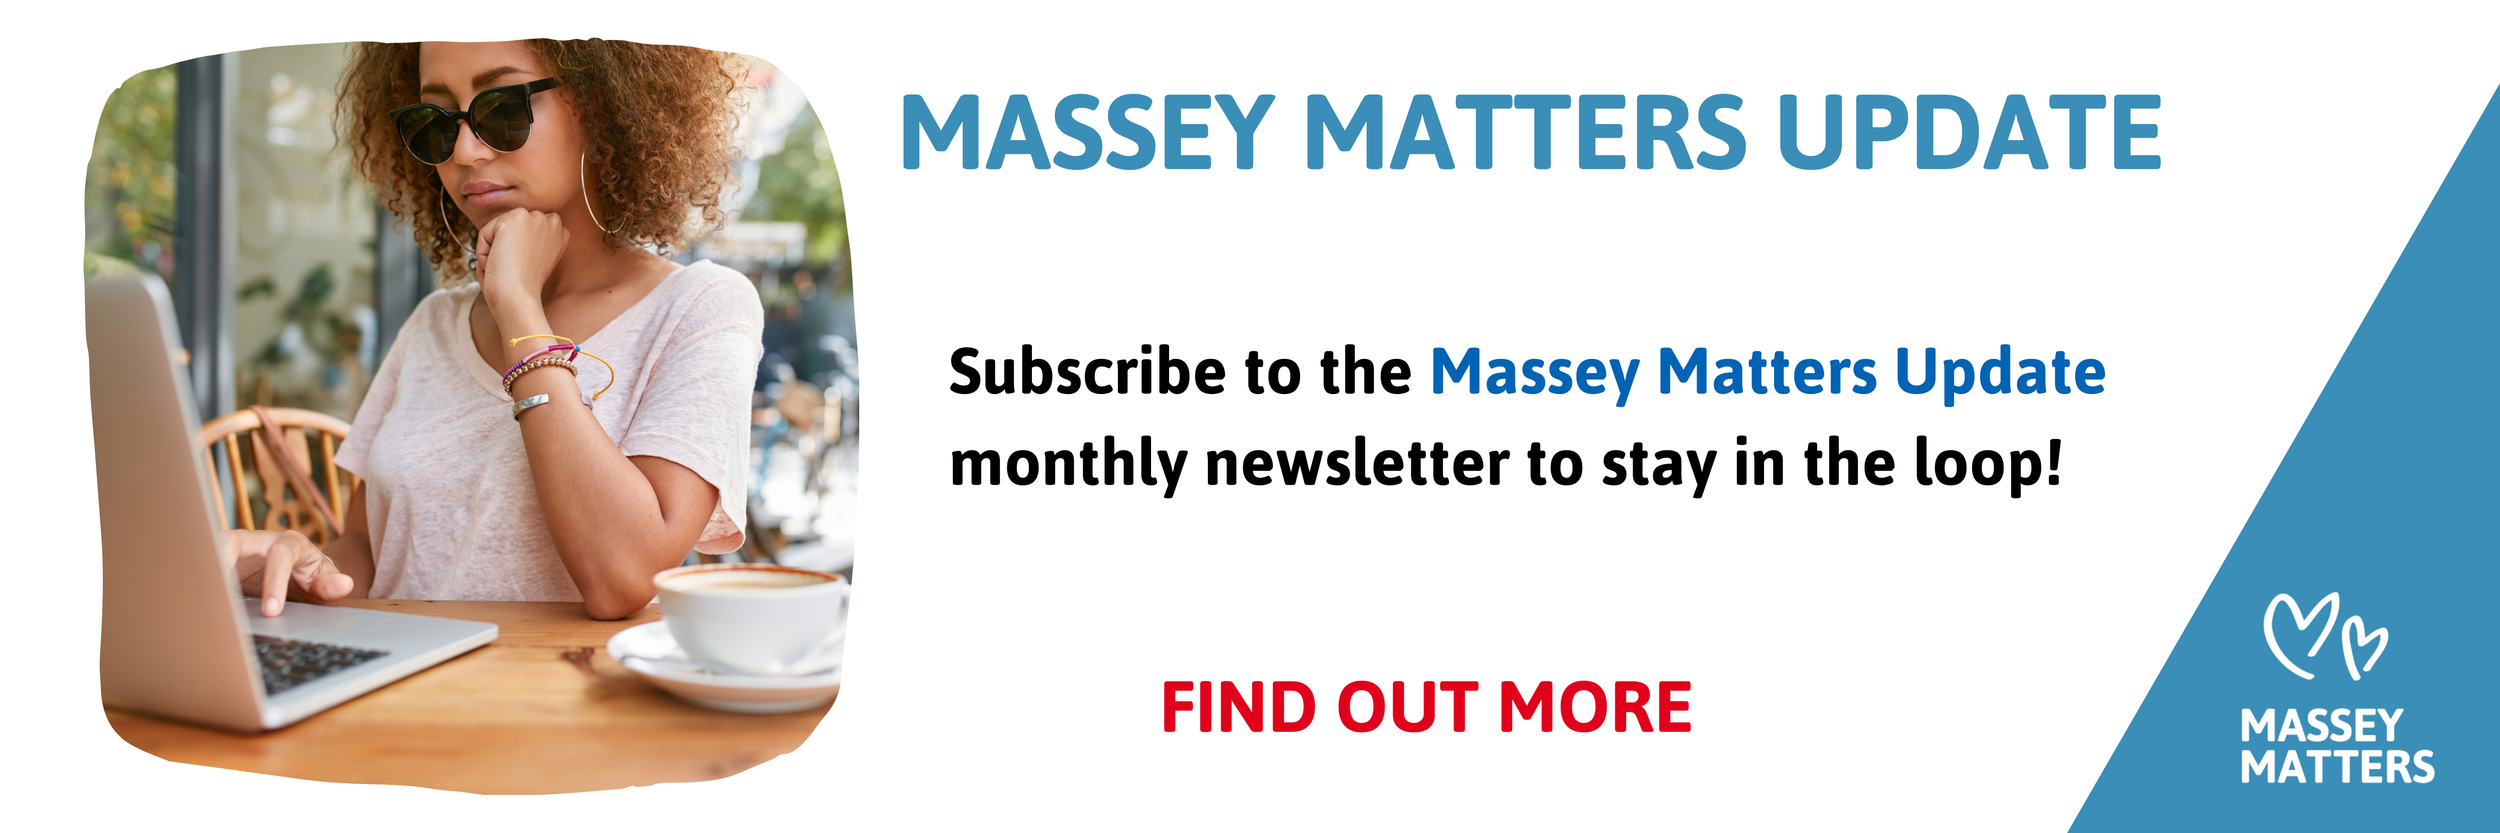 Subscribe to Massey Matters Update newsletter